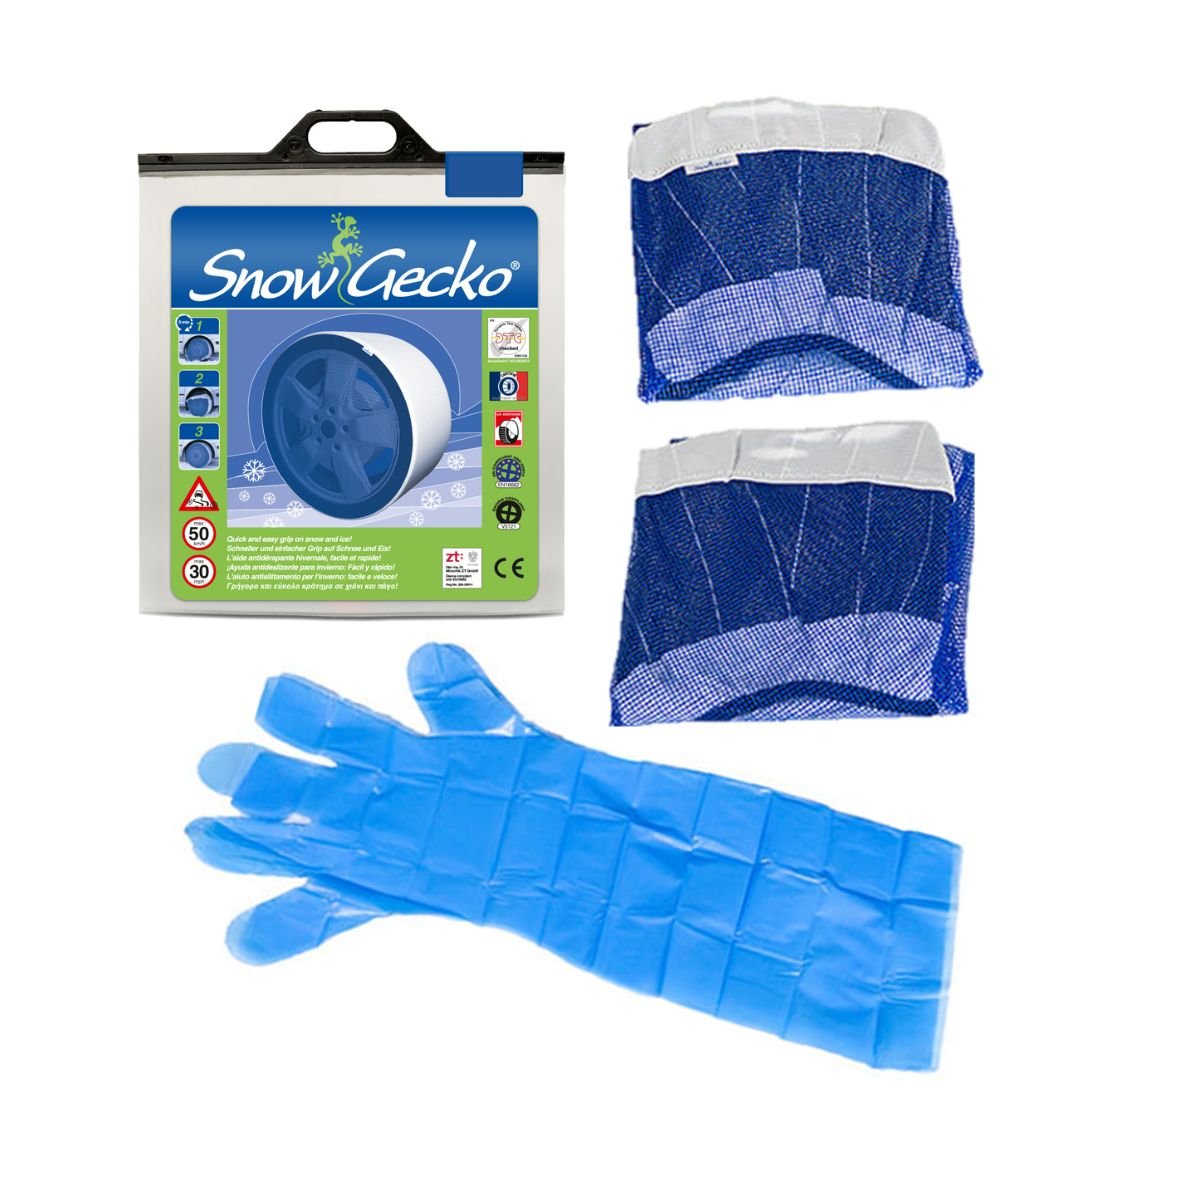 SnowGecko L/XL bag includes a pair of tire socks and gloves